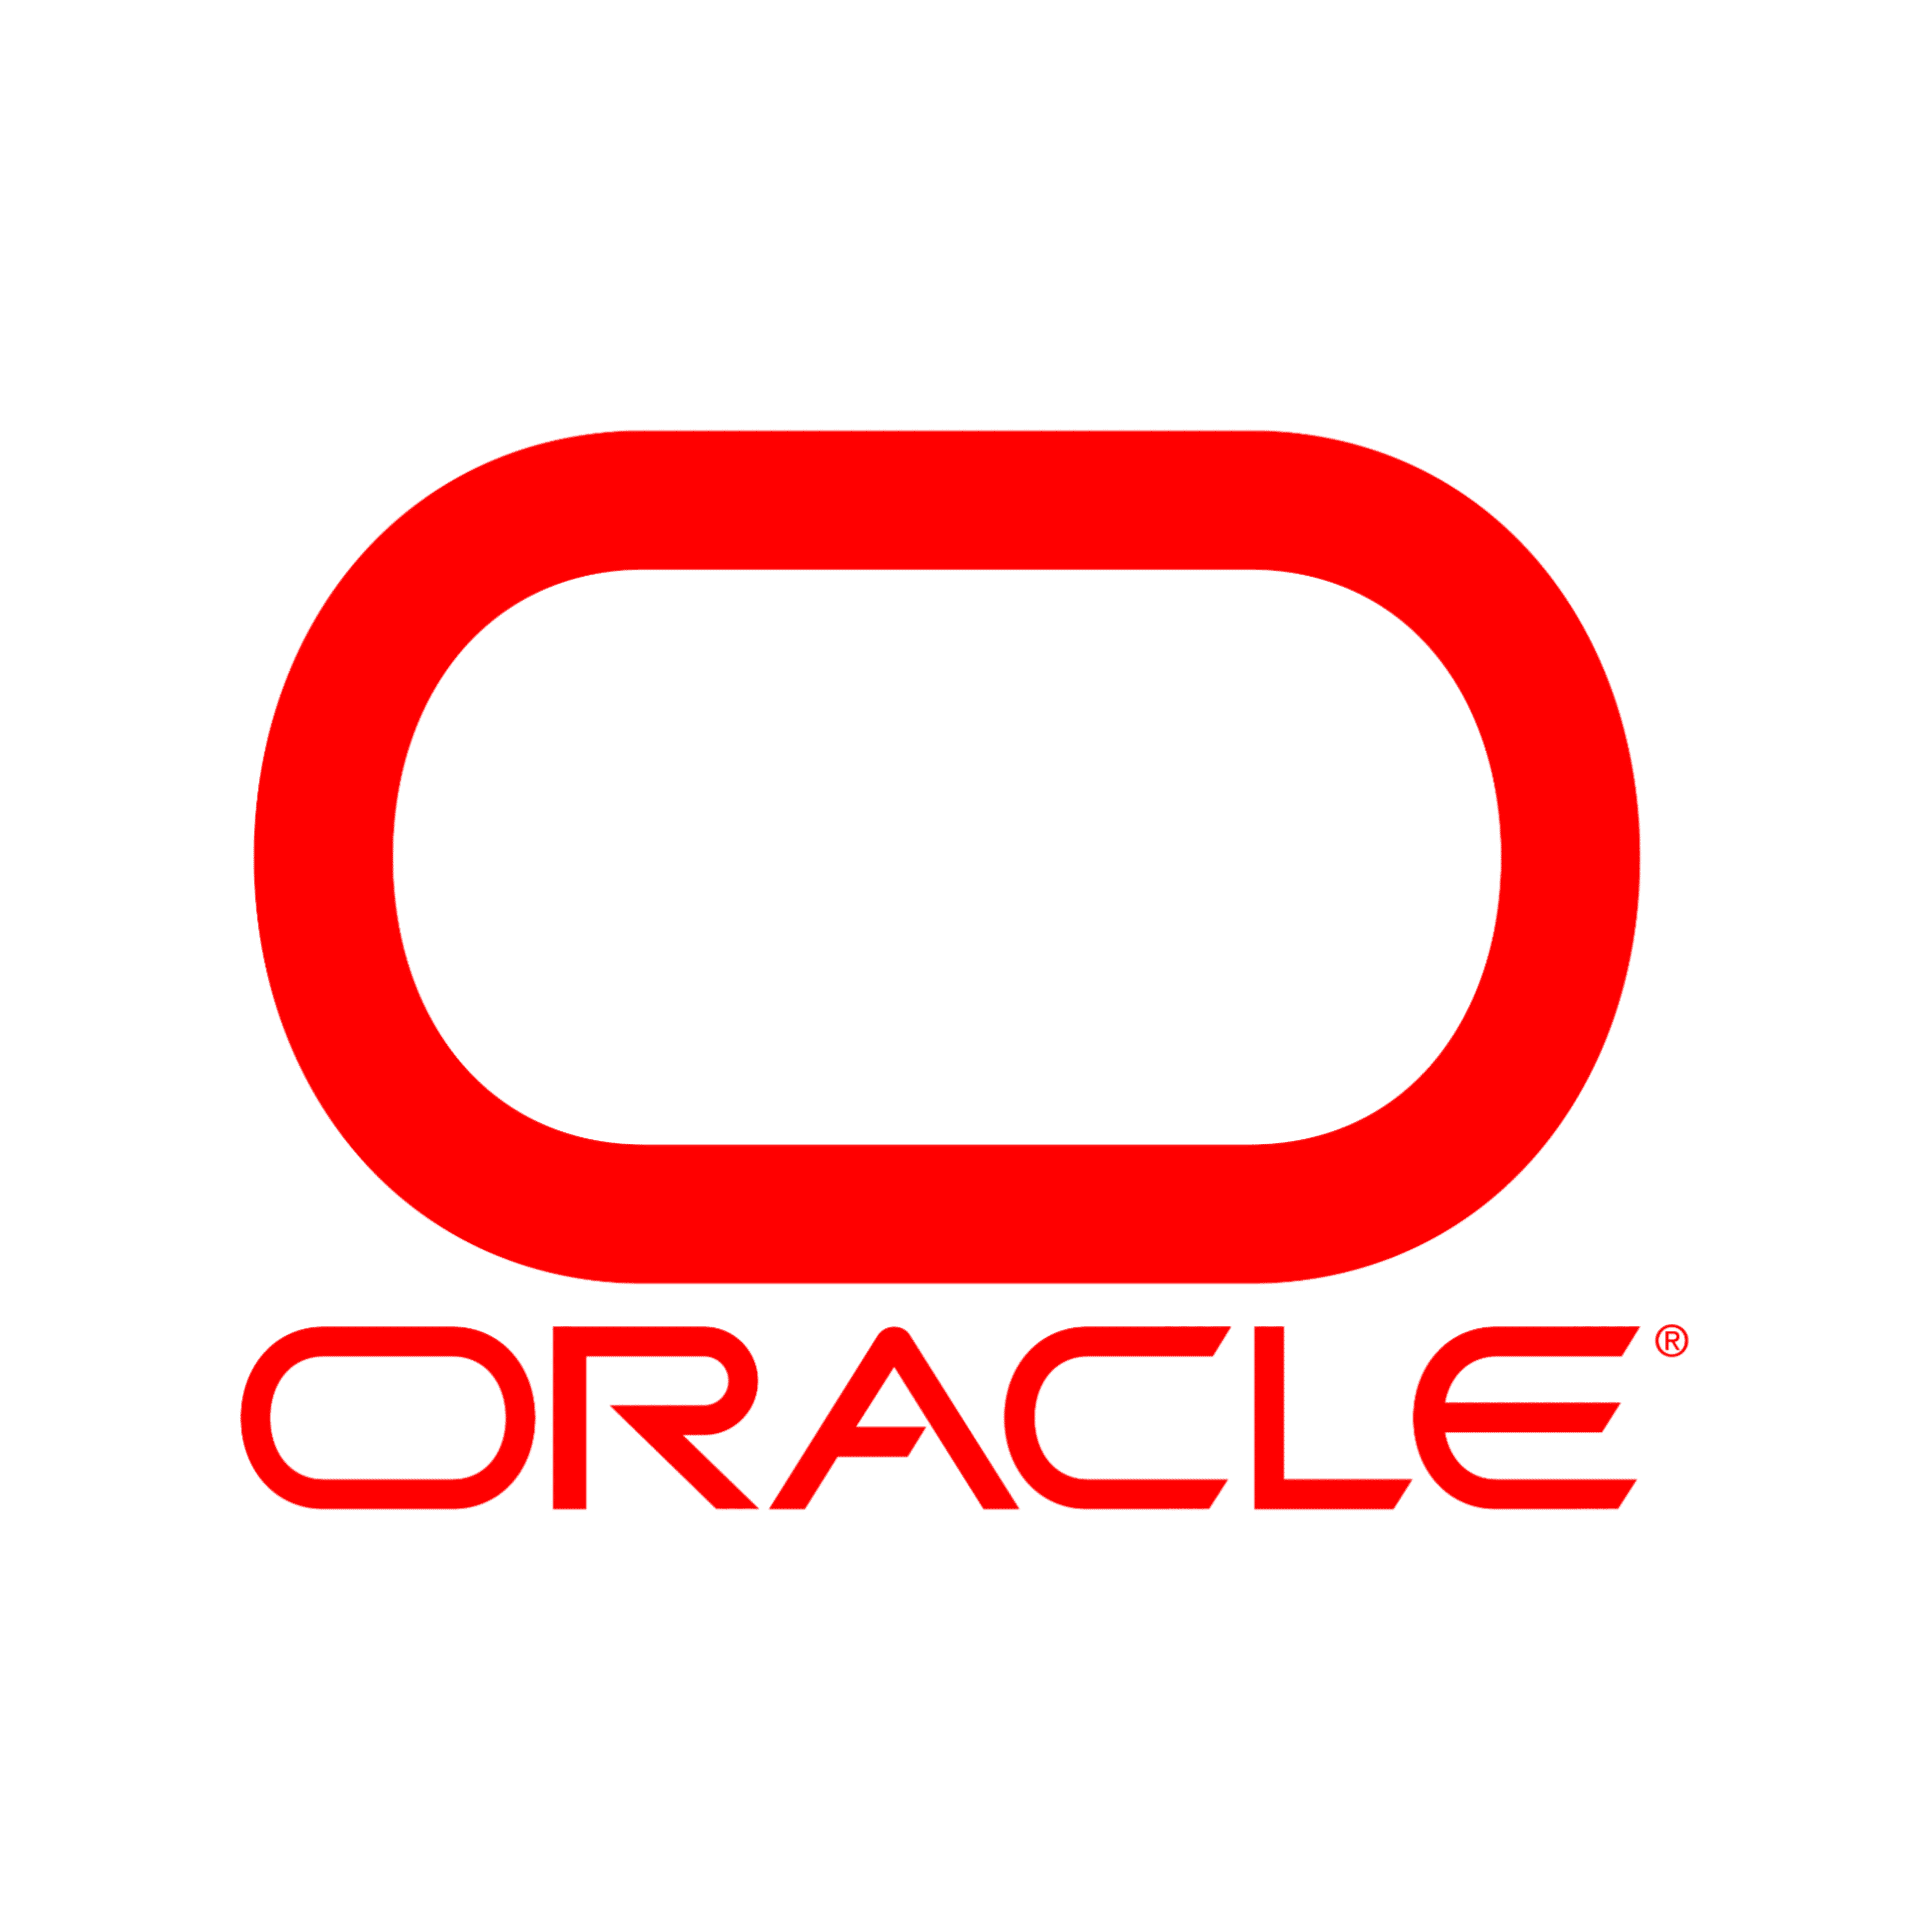 Oracle experts